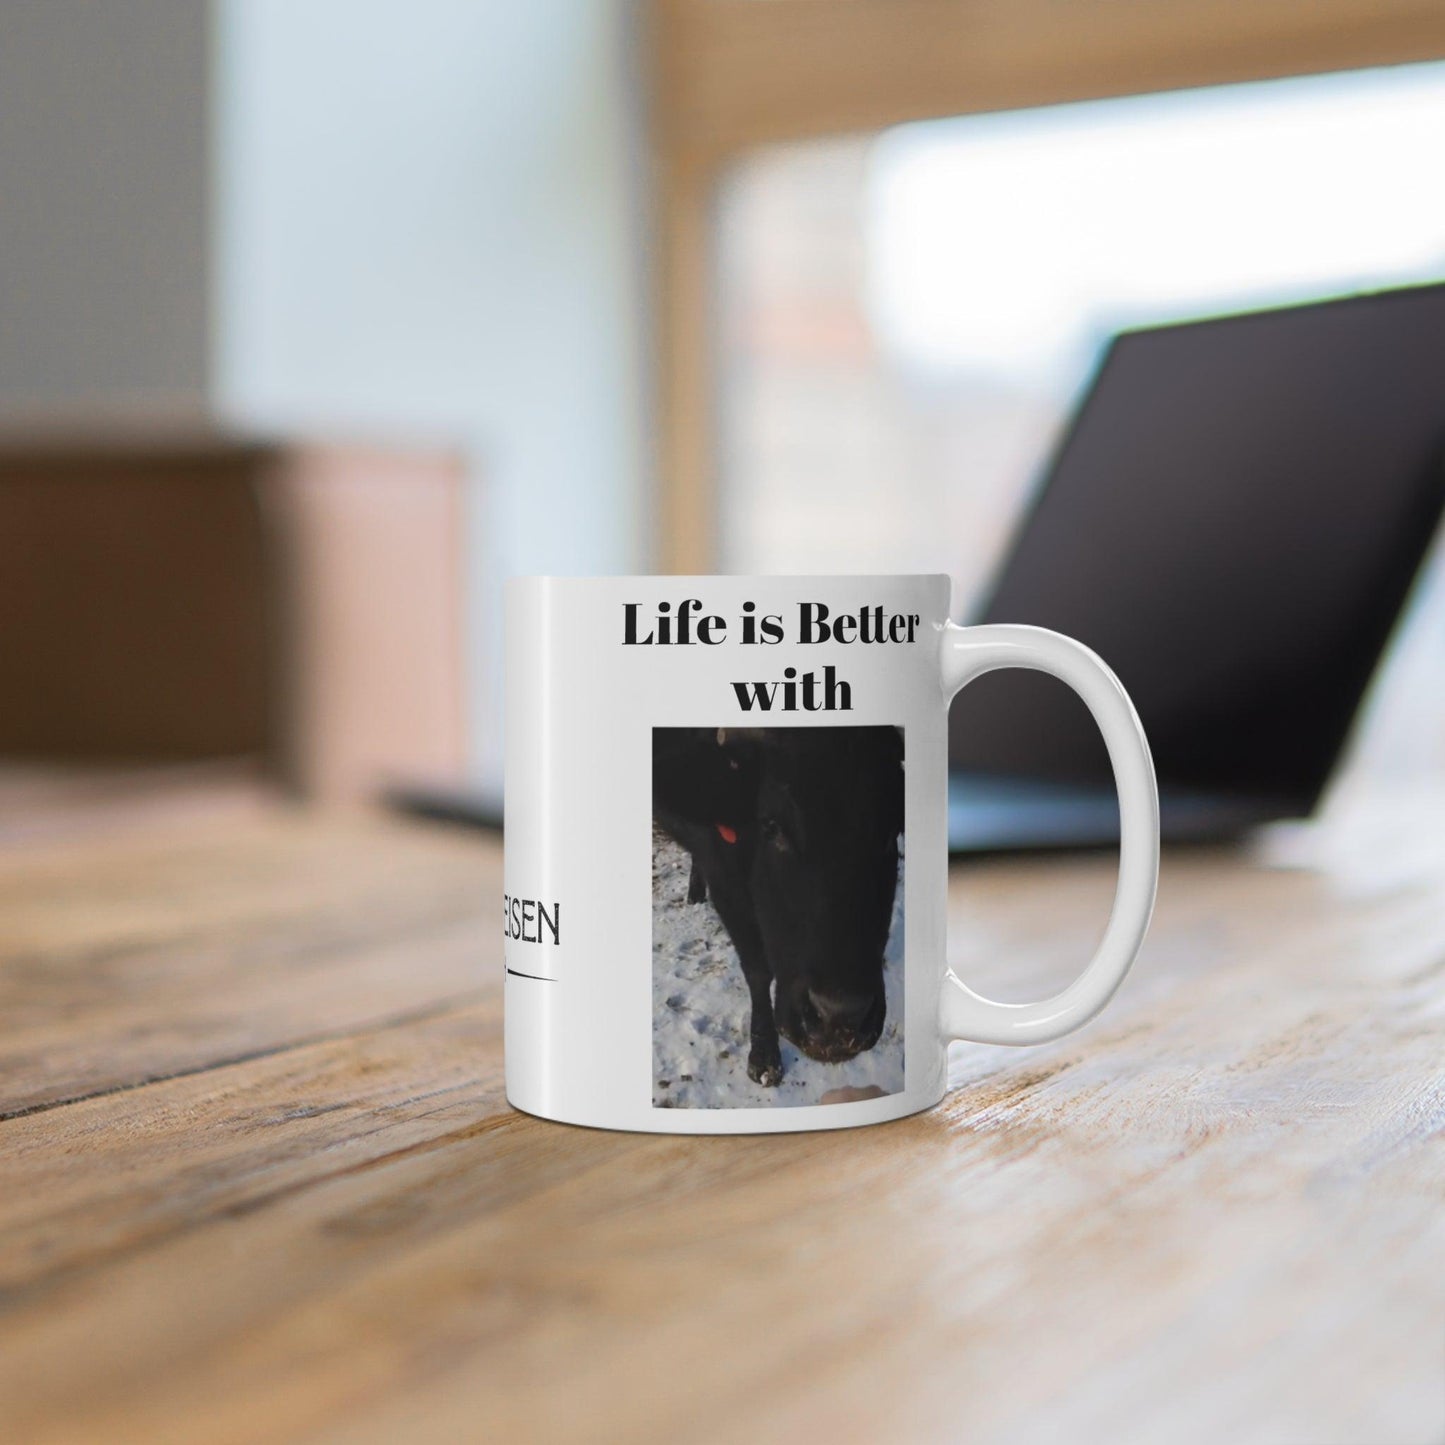 Life is Better with Cows Mug 11ozPerfect for coffee, tea and hot chocolate, this classic shape white, durable ceramic mug comes in the most popular size. High quality sublimation printing makes it aCows Mug 11ozThe Hufeisen-Ranch (WYO Wagyu)Mug